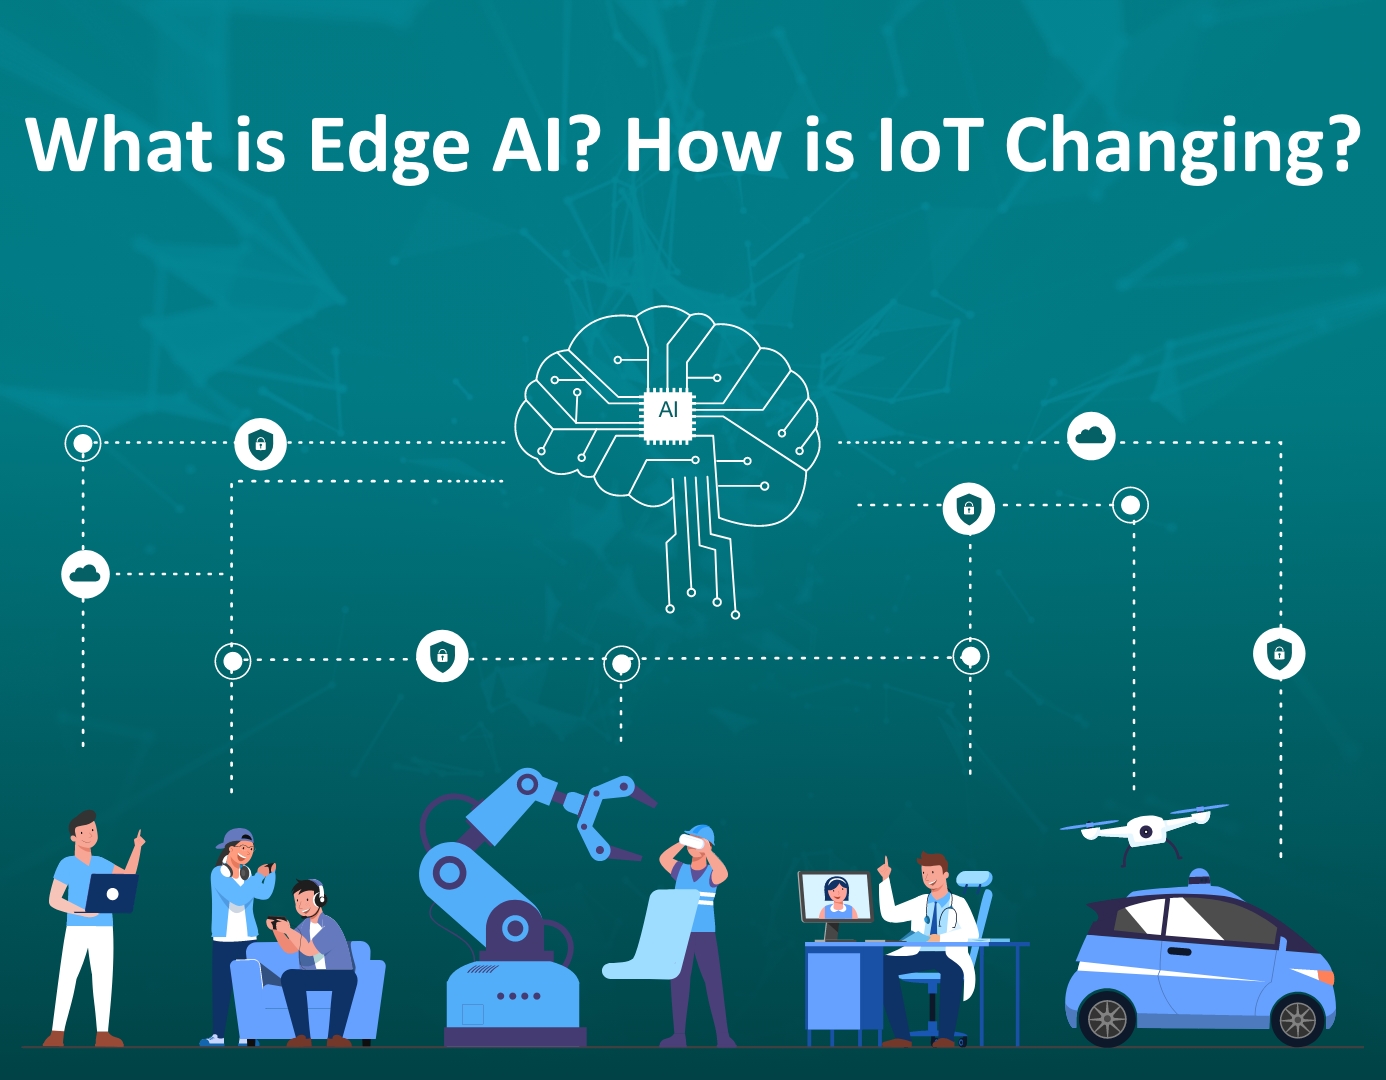 What is Edge AI? How is IoT changing?